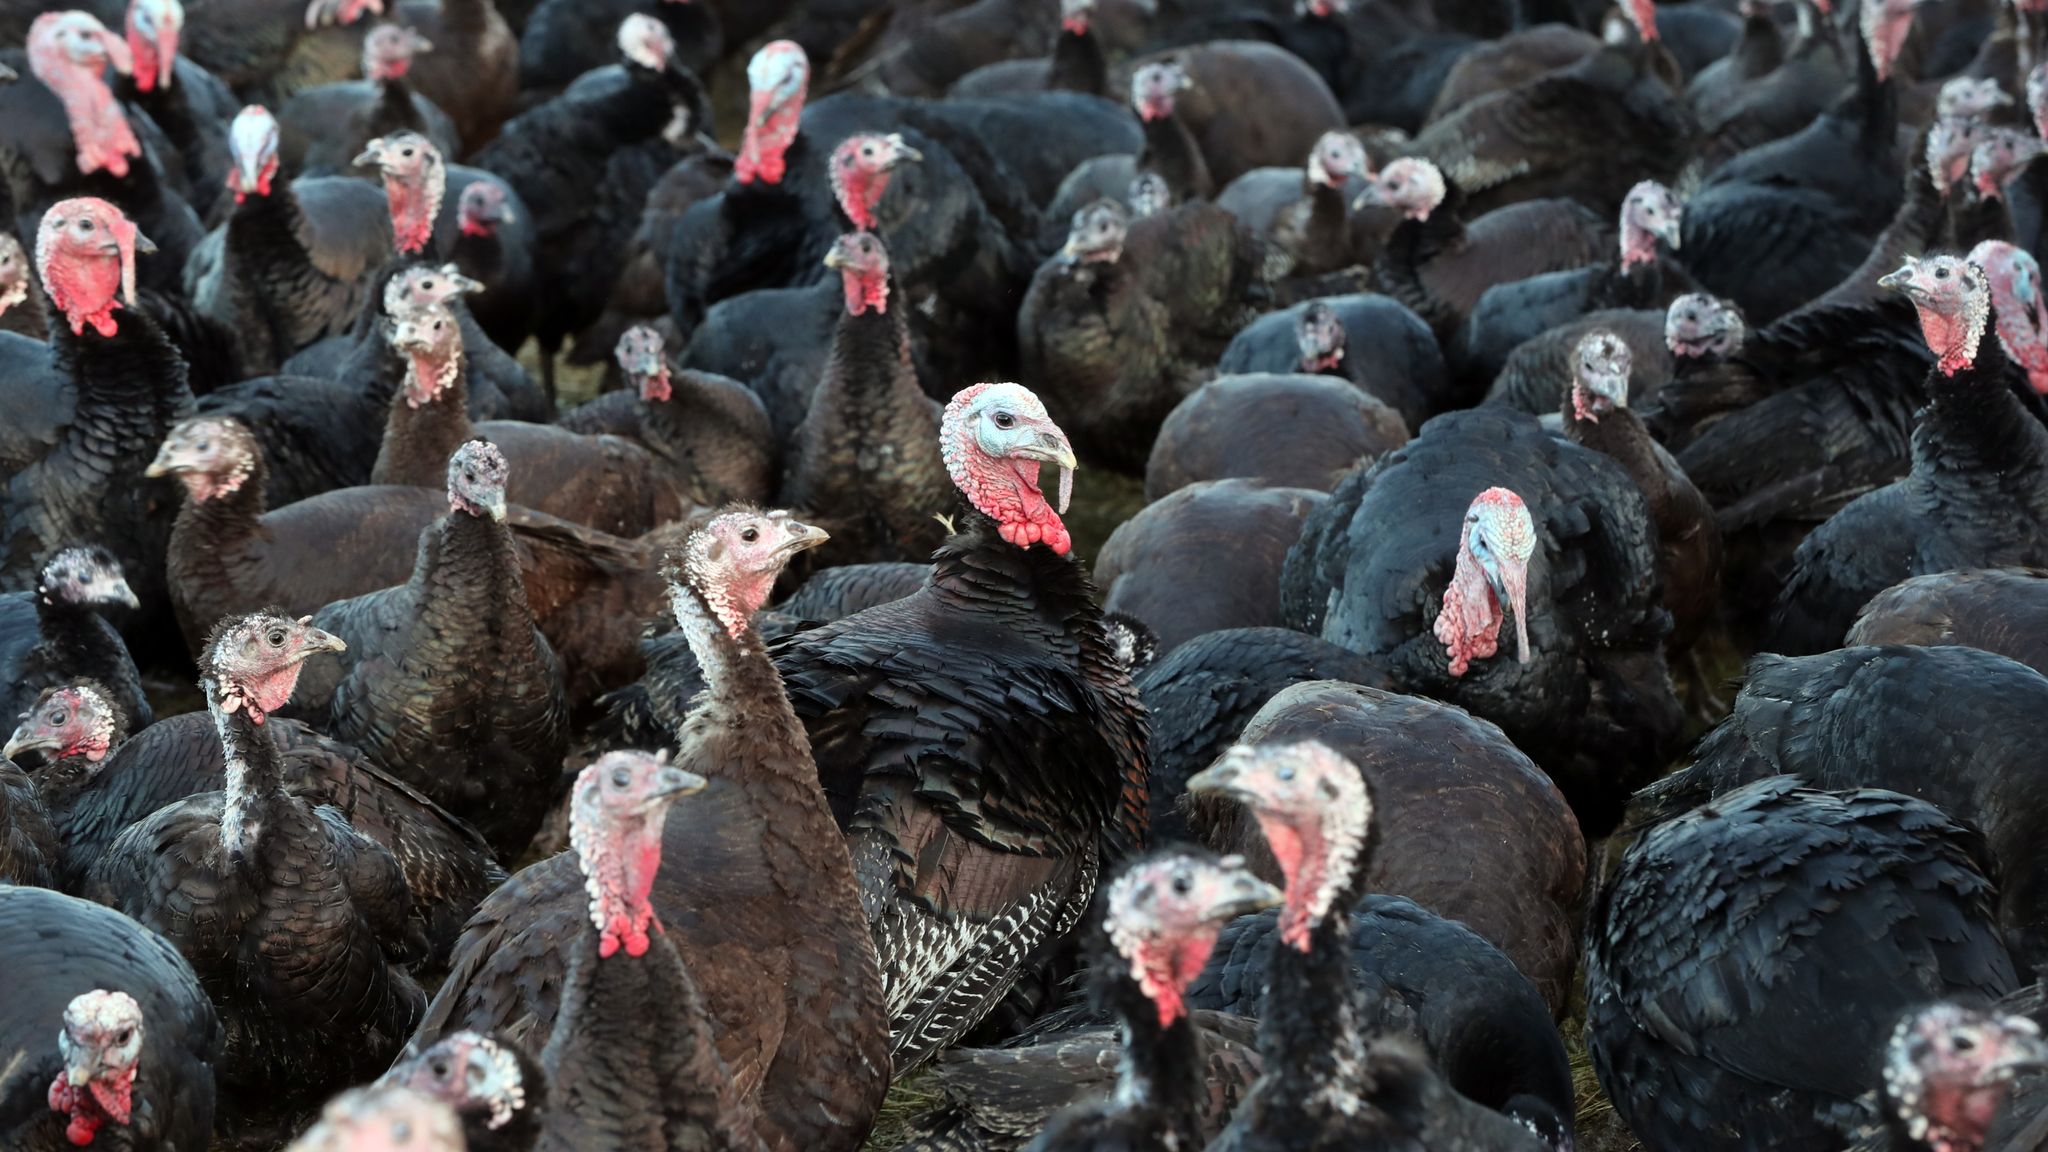 CO2 shortage may 'cancel Christmas', major poultry supplier warns